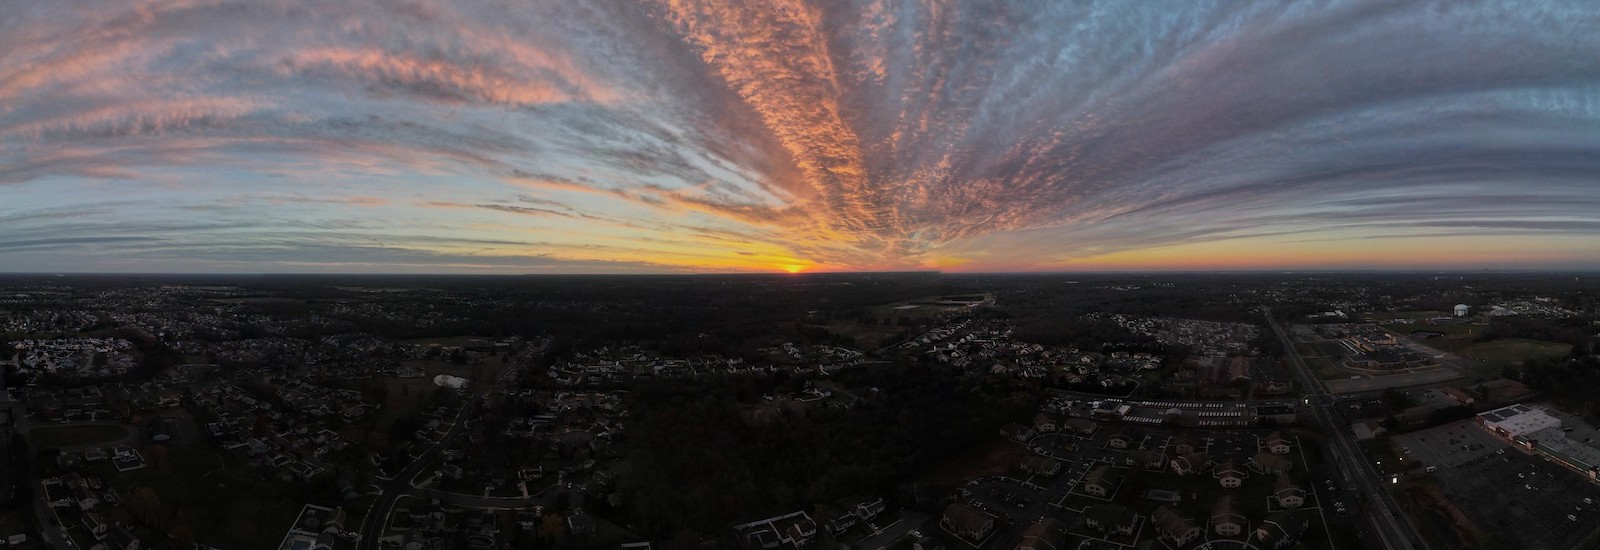 Dramtically colored sunset over the town of Glassboro, as seen from a drone.